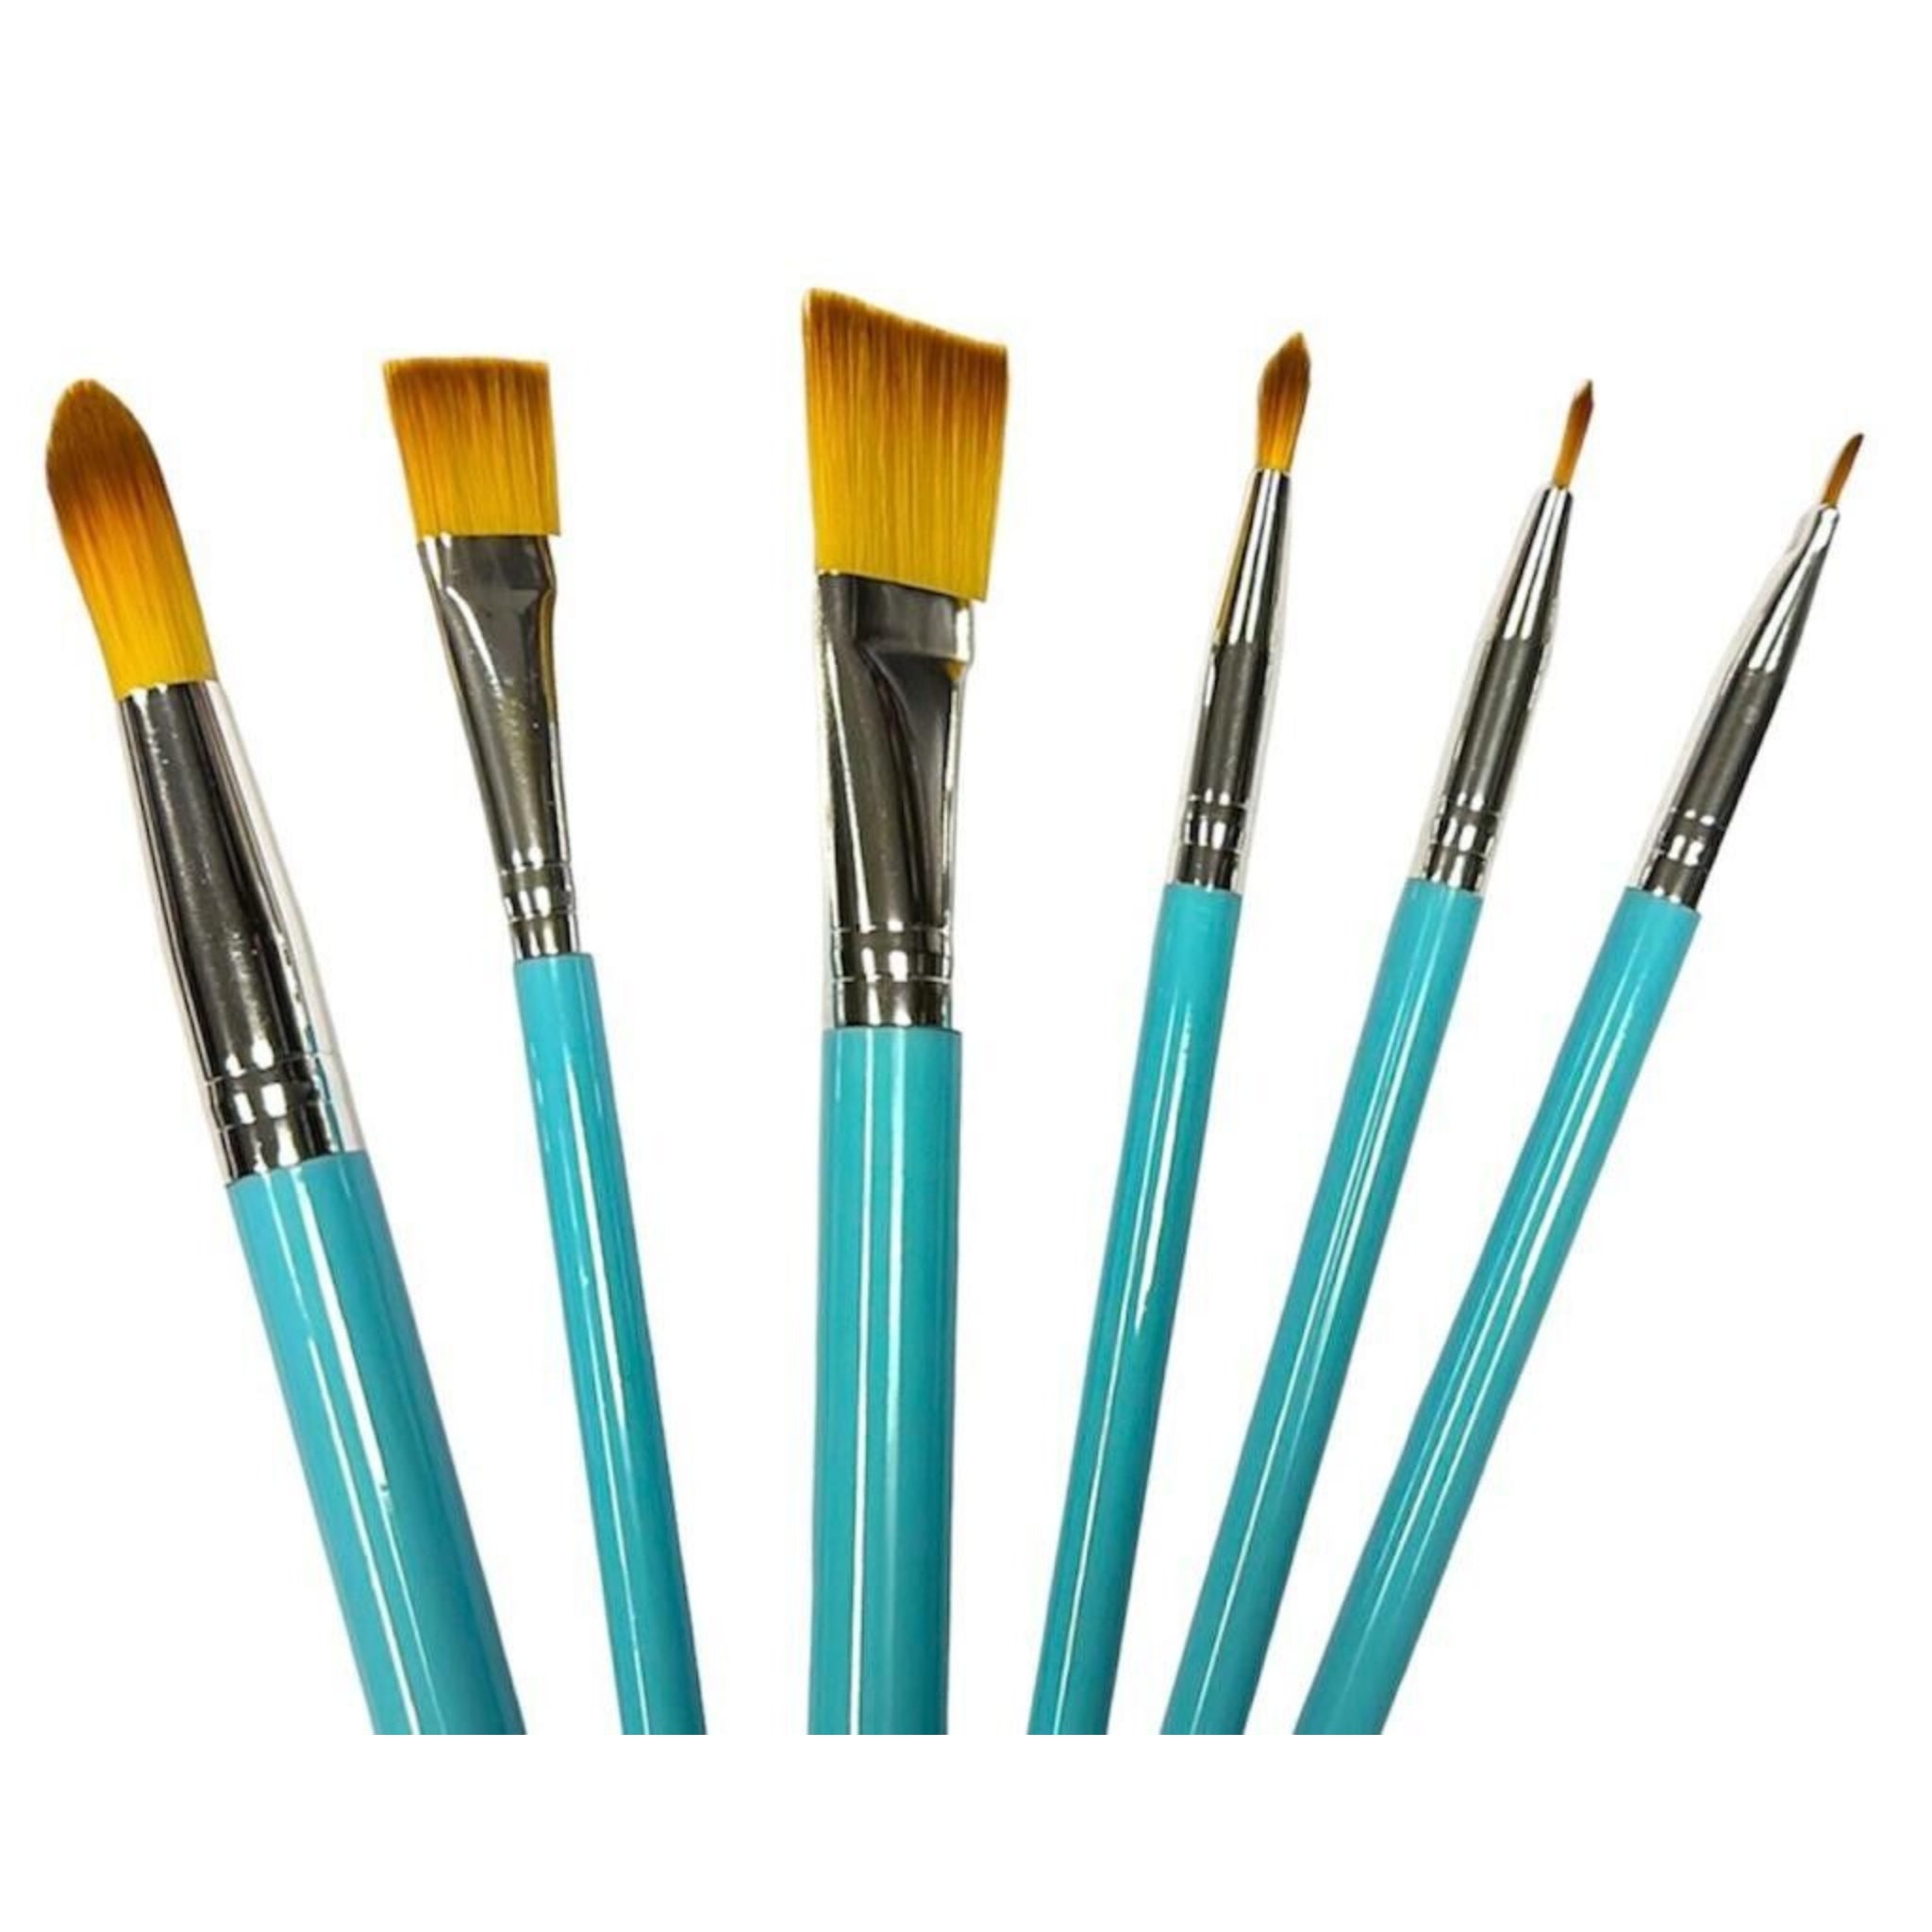 Beclen Harp 6pc Cake Icing And Decorating Paint Brushes-Perfect Fondant Dusting Sugar Craft Clay Tool